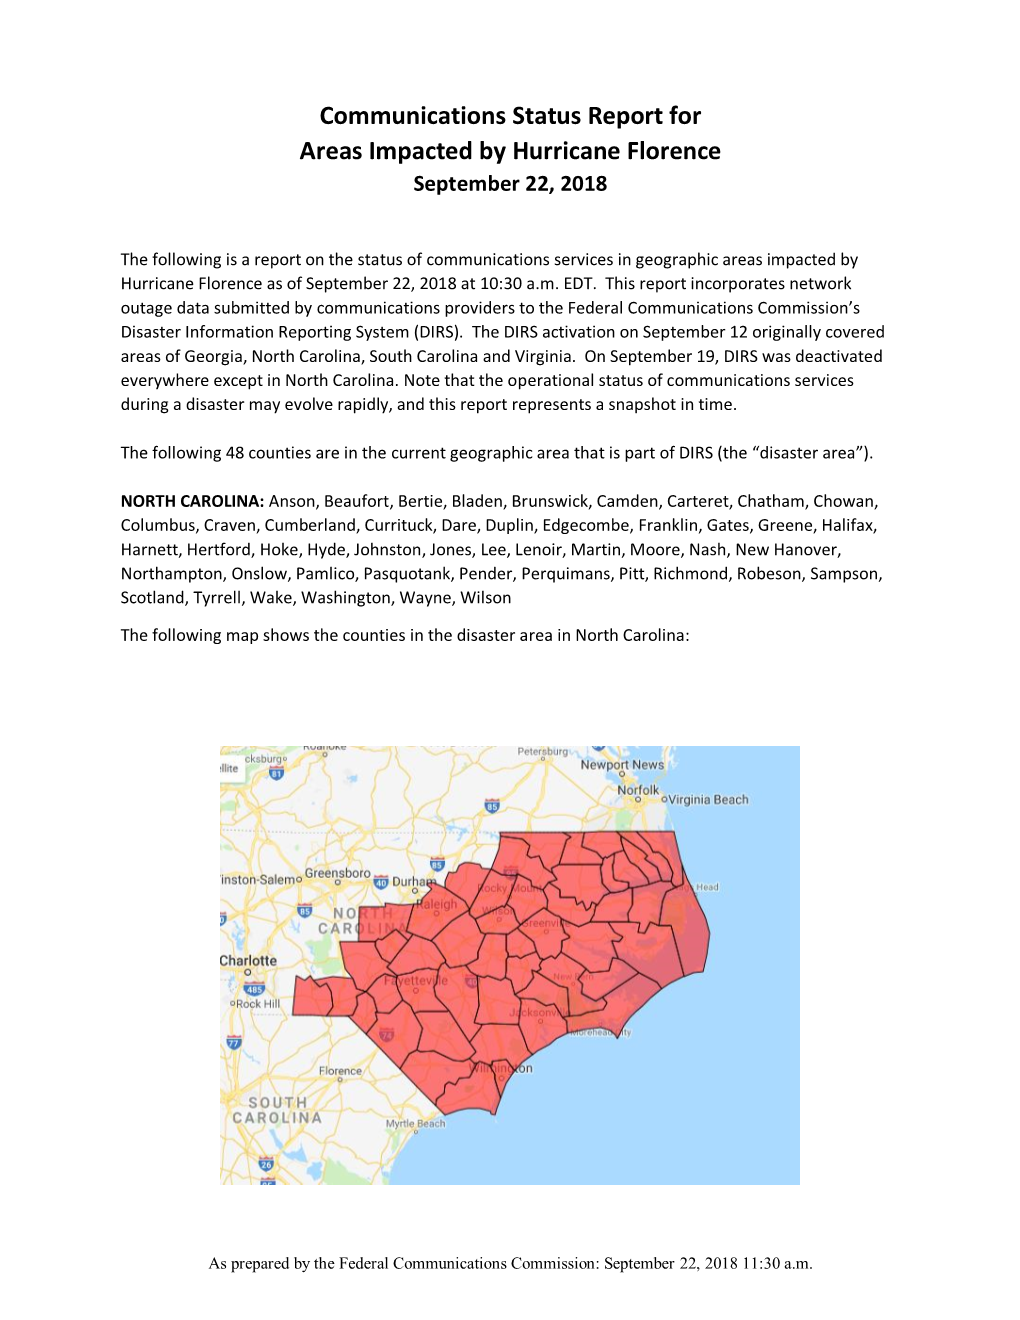 Communications Status Report for Areas Impacted by Hurricane Florence September 22, 2018